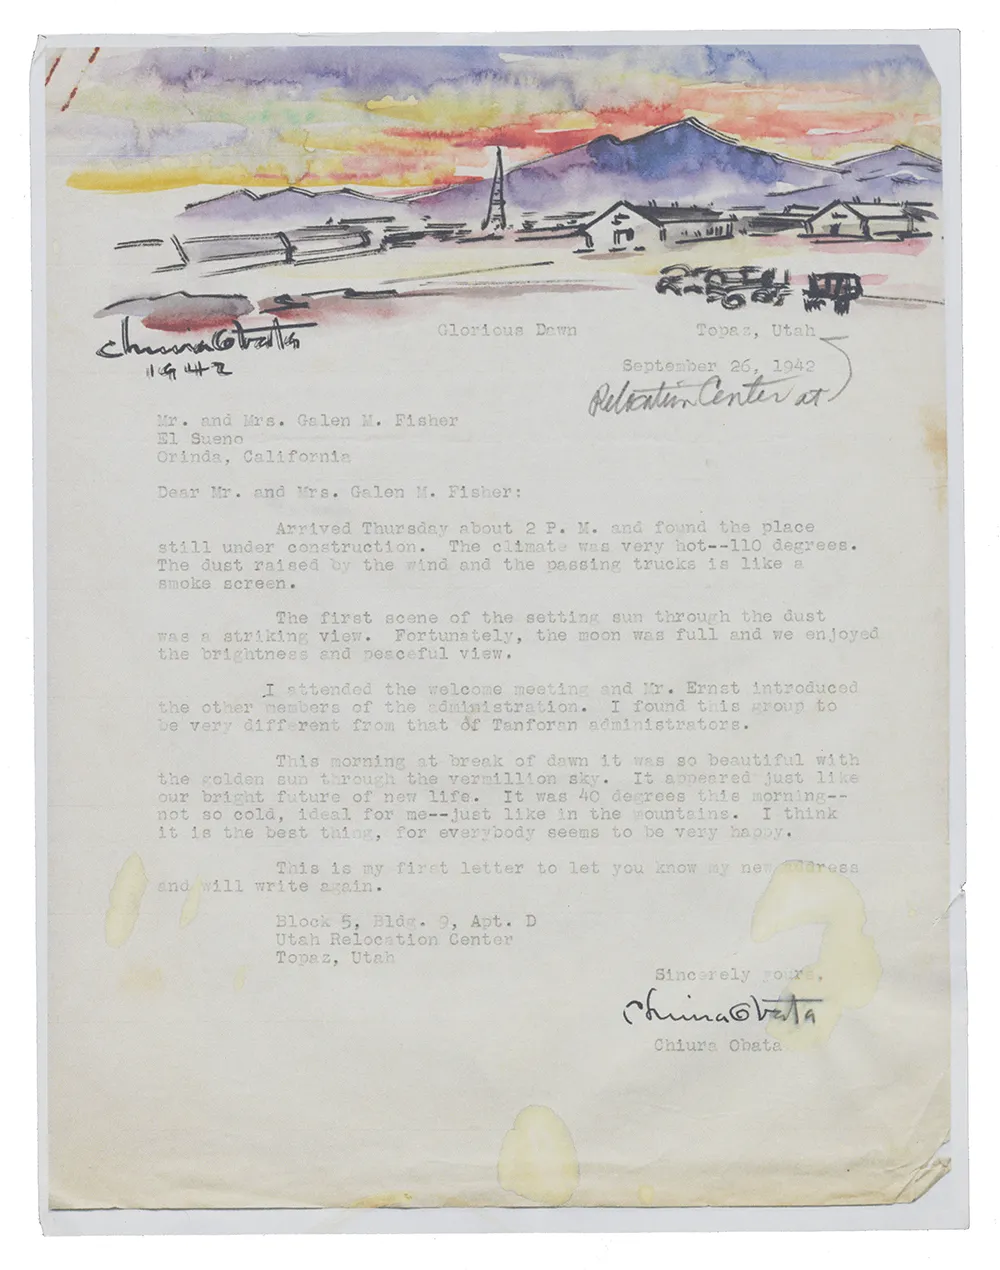 Typewritten letter with a black ink and watercolor sketch of a sunrise in purple, yellow, orange, and red behind bluish-purple mountains. In the foreground of the sketch are buildings and trucks of an incarceration camp.